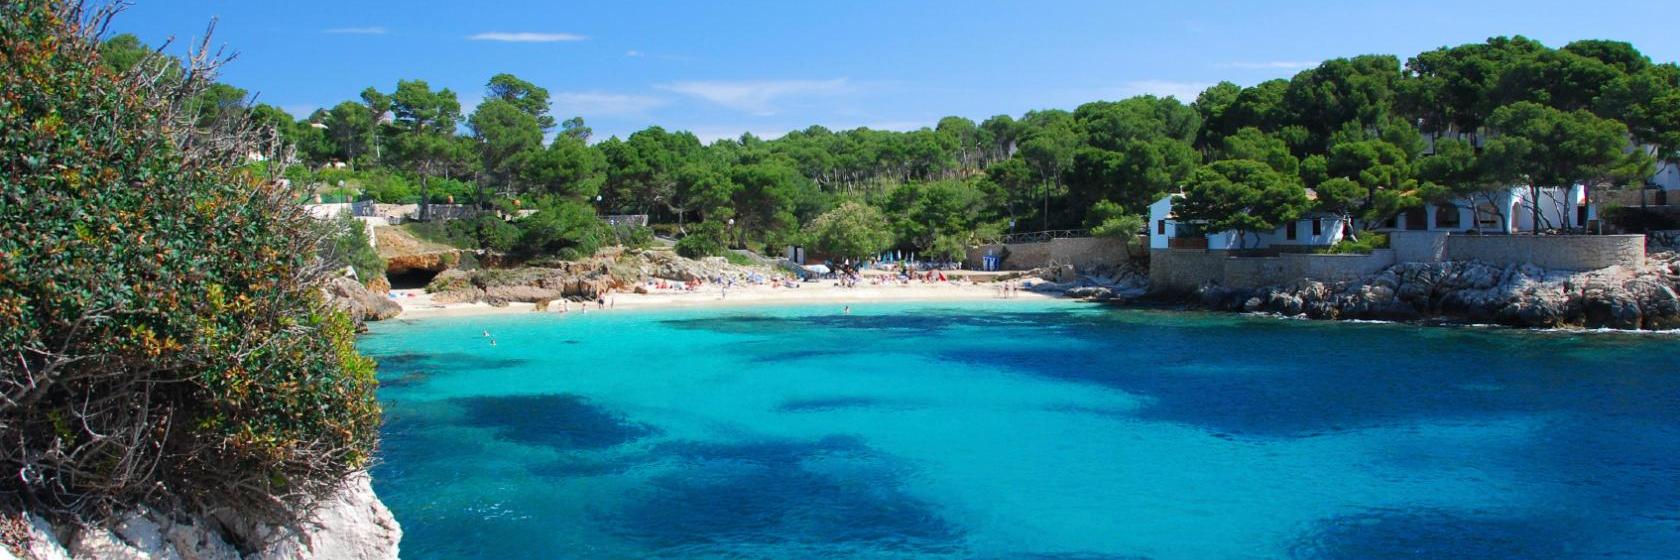 Hotels in Cala d´Or, Spain – save 15% with the best deals